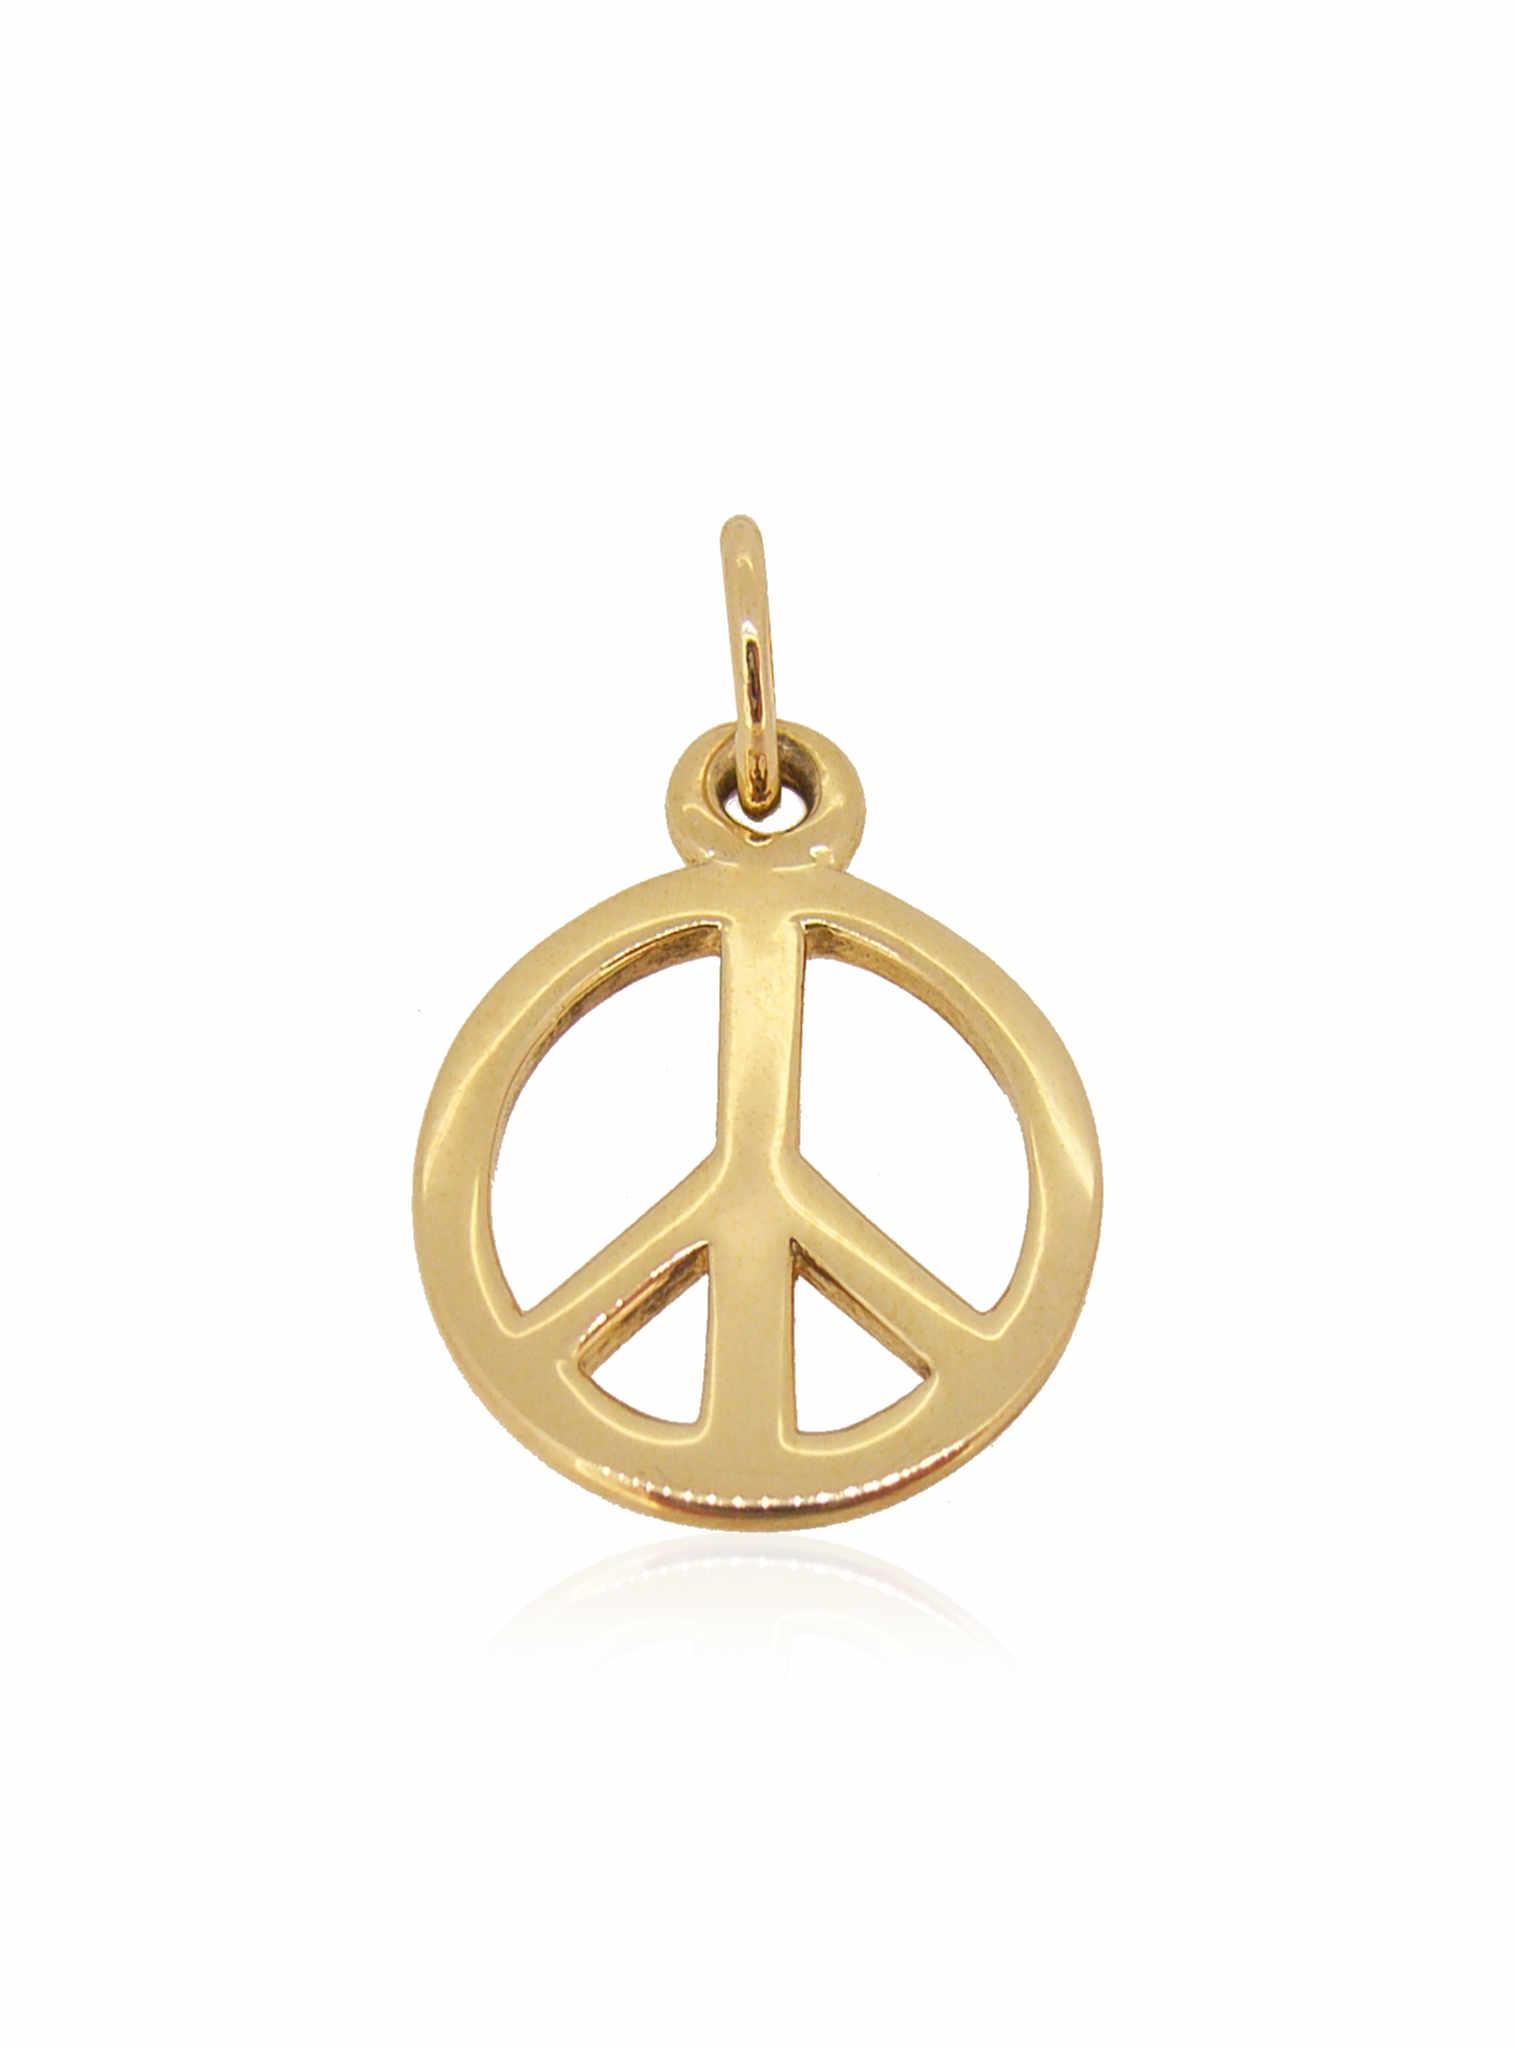 Peace Sign Necklace - Everyday Silver Peace Jewelry-B6589-NK